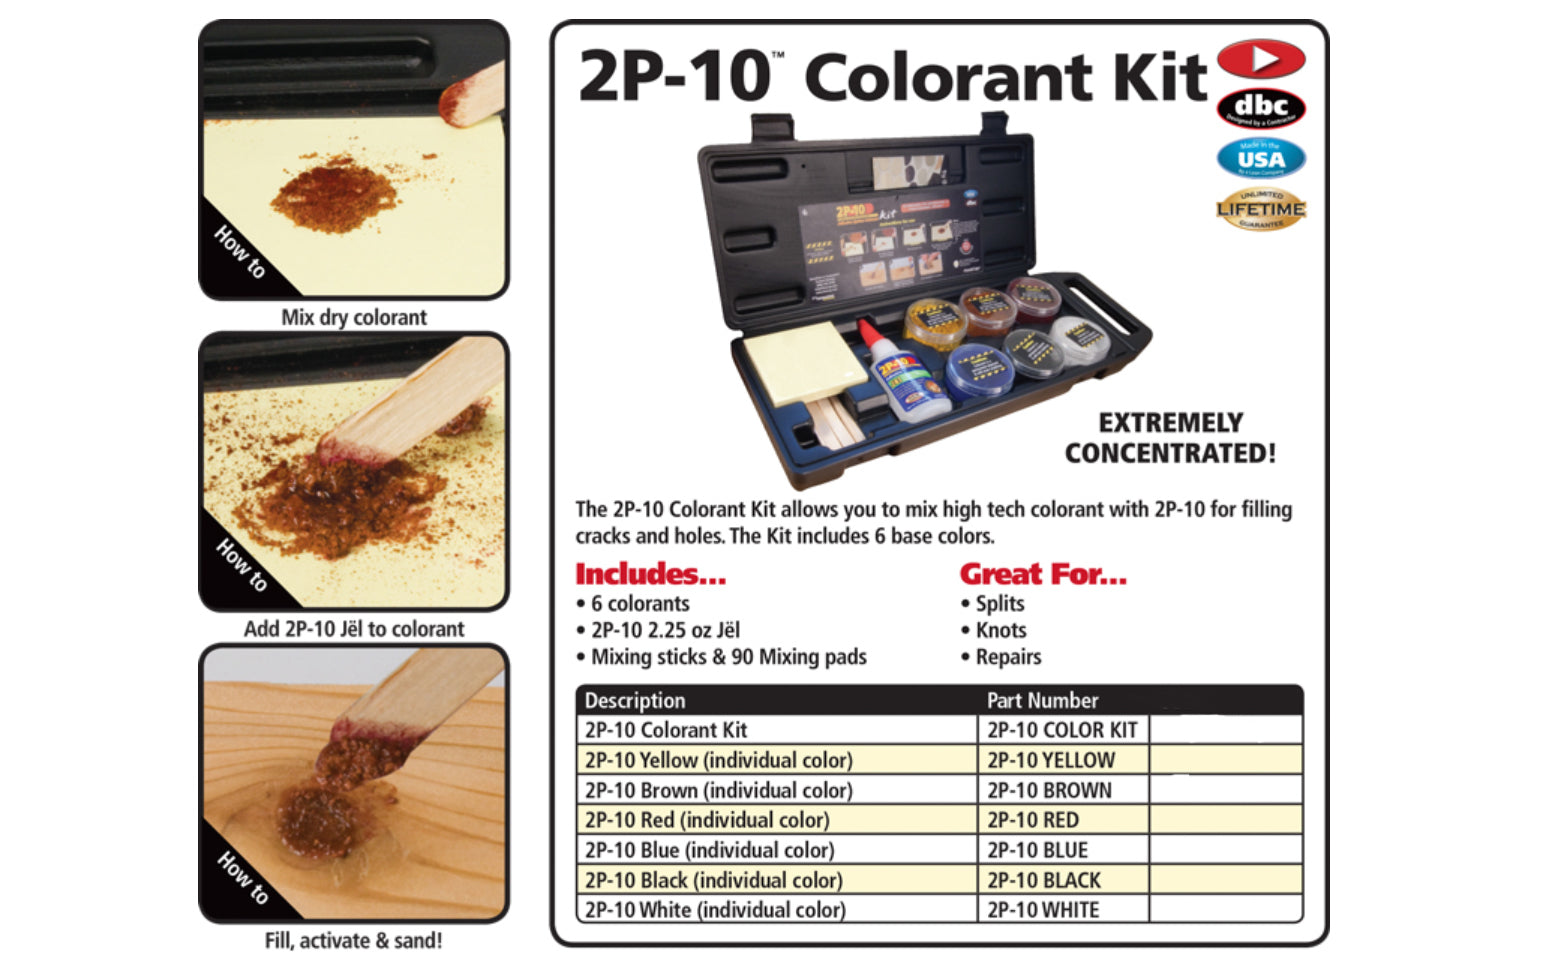 FastCap Adhesive System Color Kit ~ Professional Wood Formula - Cyanoacrylate Glue. Allows you to get the right tint for 2P-10 glue. This high tech colorant is specifically made to work with 2P-10 adhesive. Simply mix the dry colorant to get the shade you want on the mixing pad, then add a small amount of 2P-10 Jel.